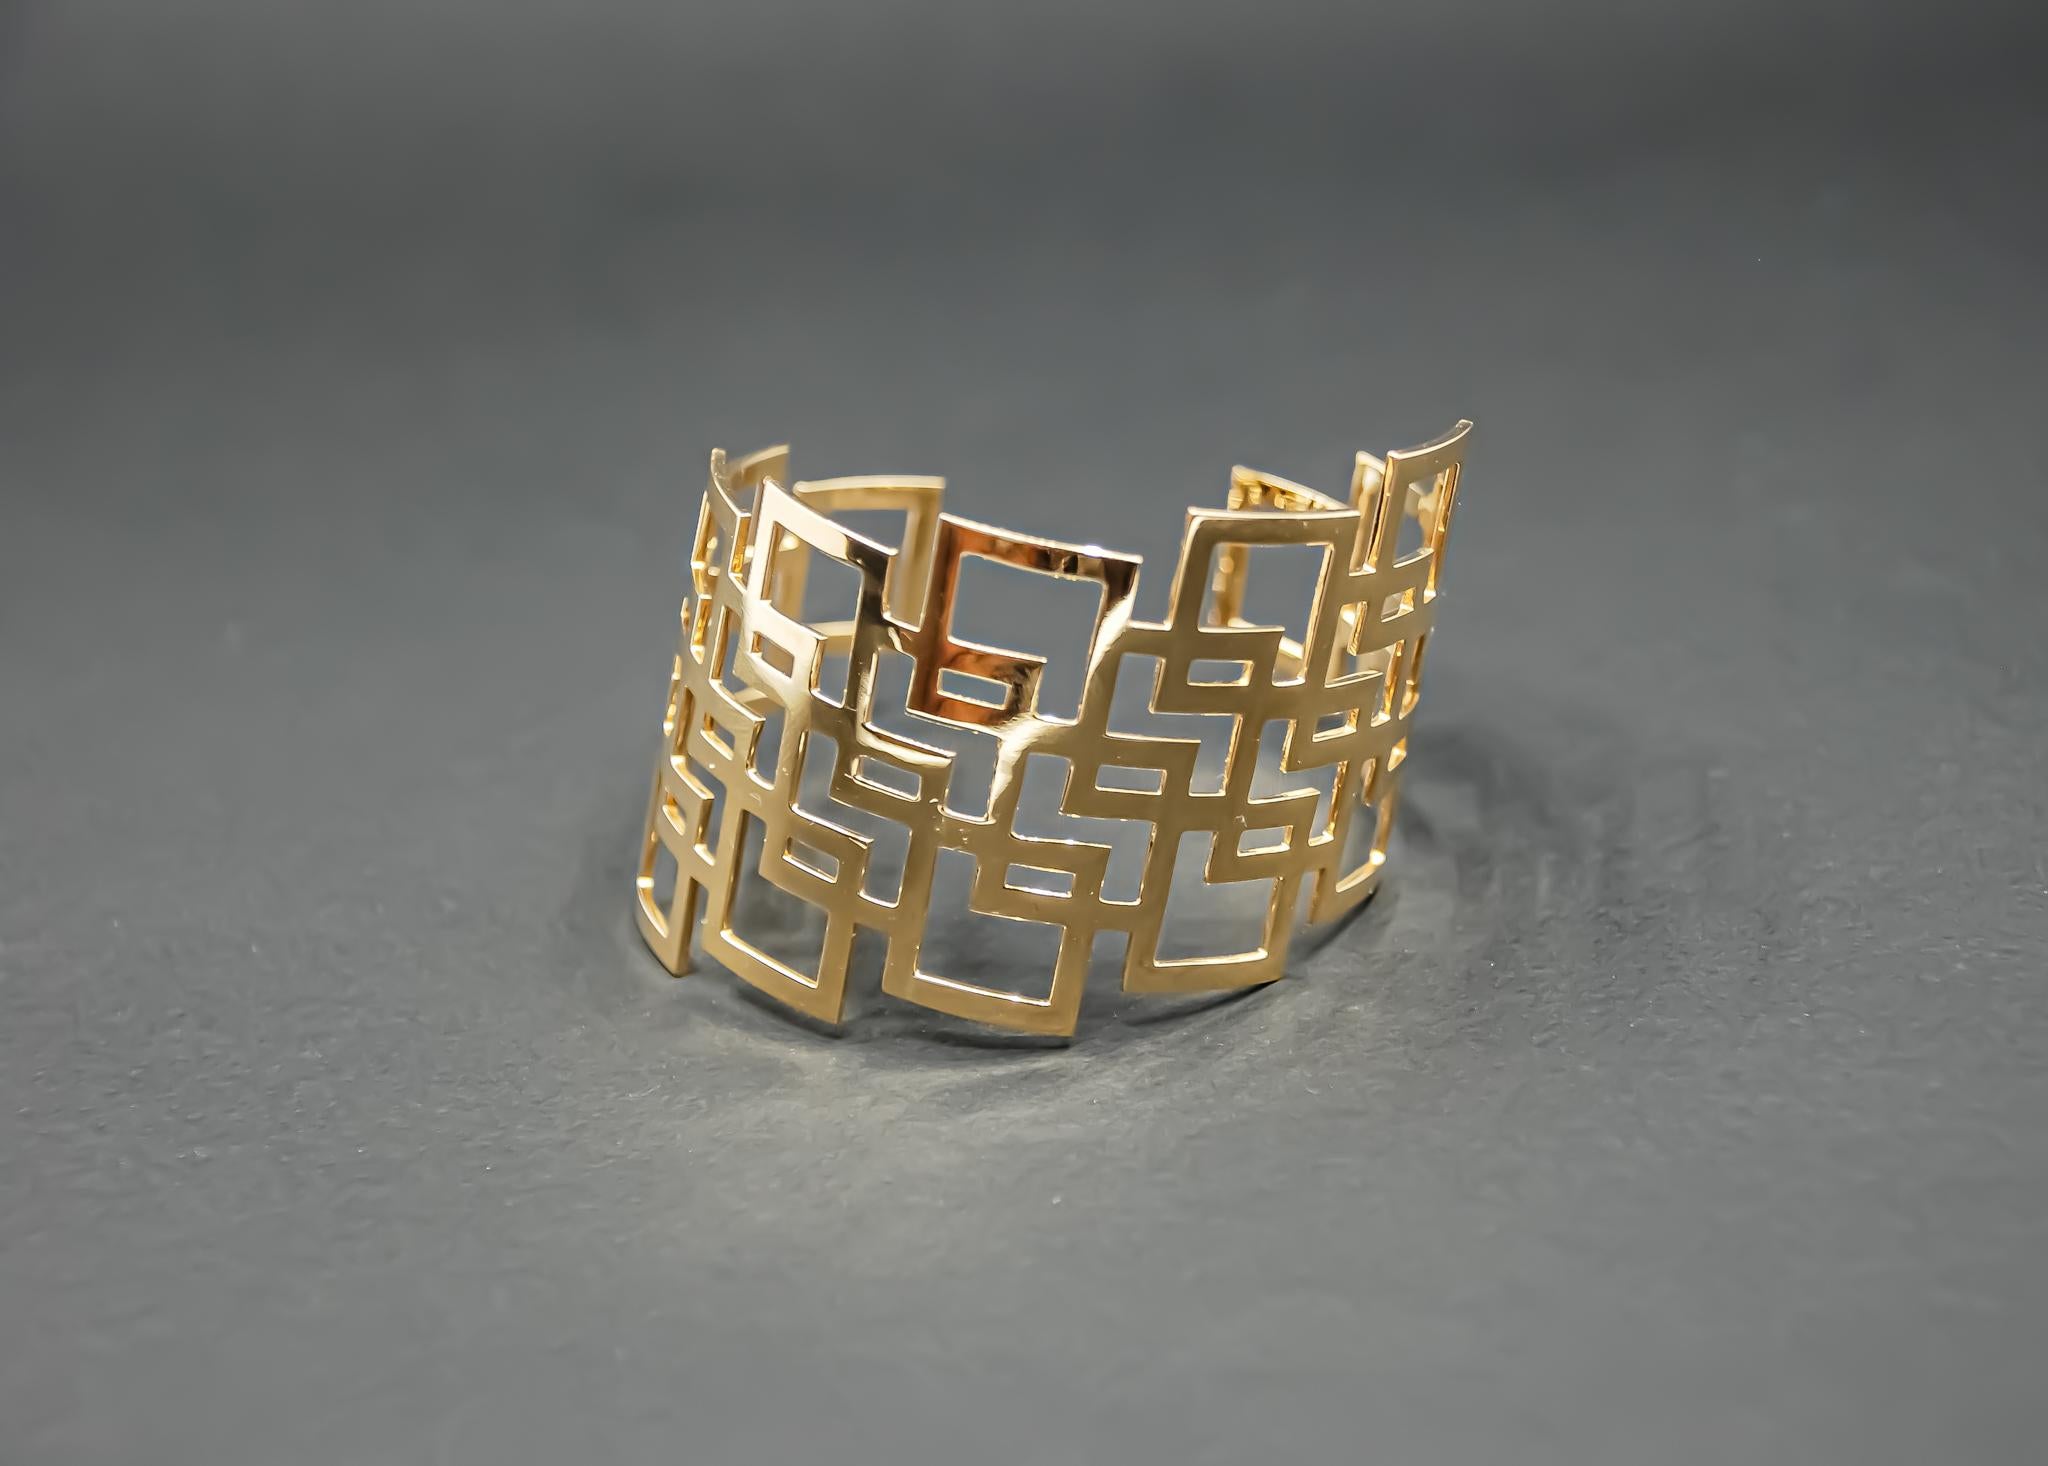 Geometric Cuff Bracelet in 18kt Gold by Mohamad Kamra For Sale 2